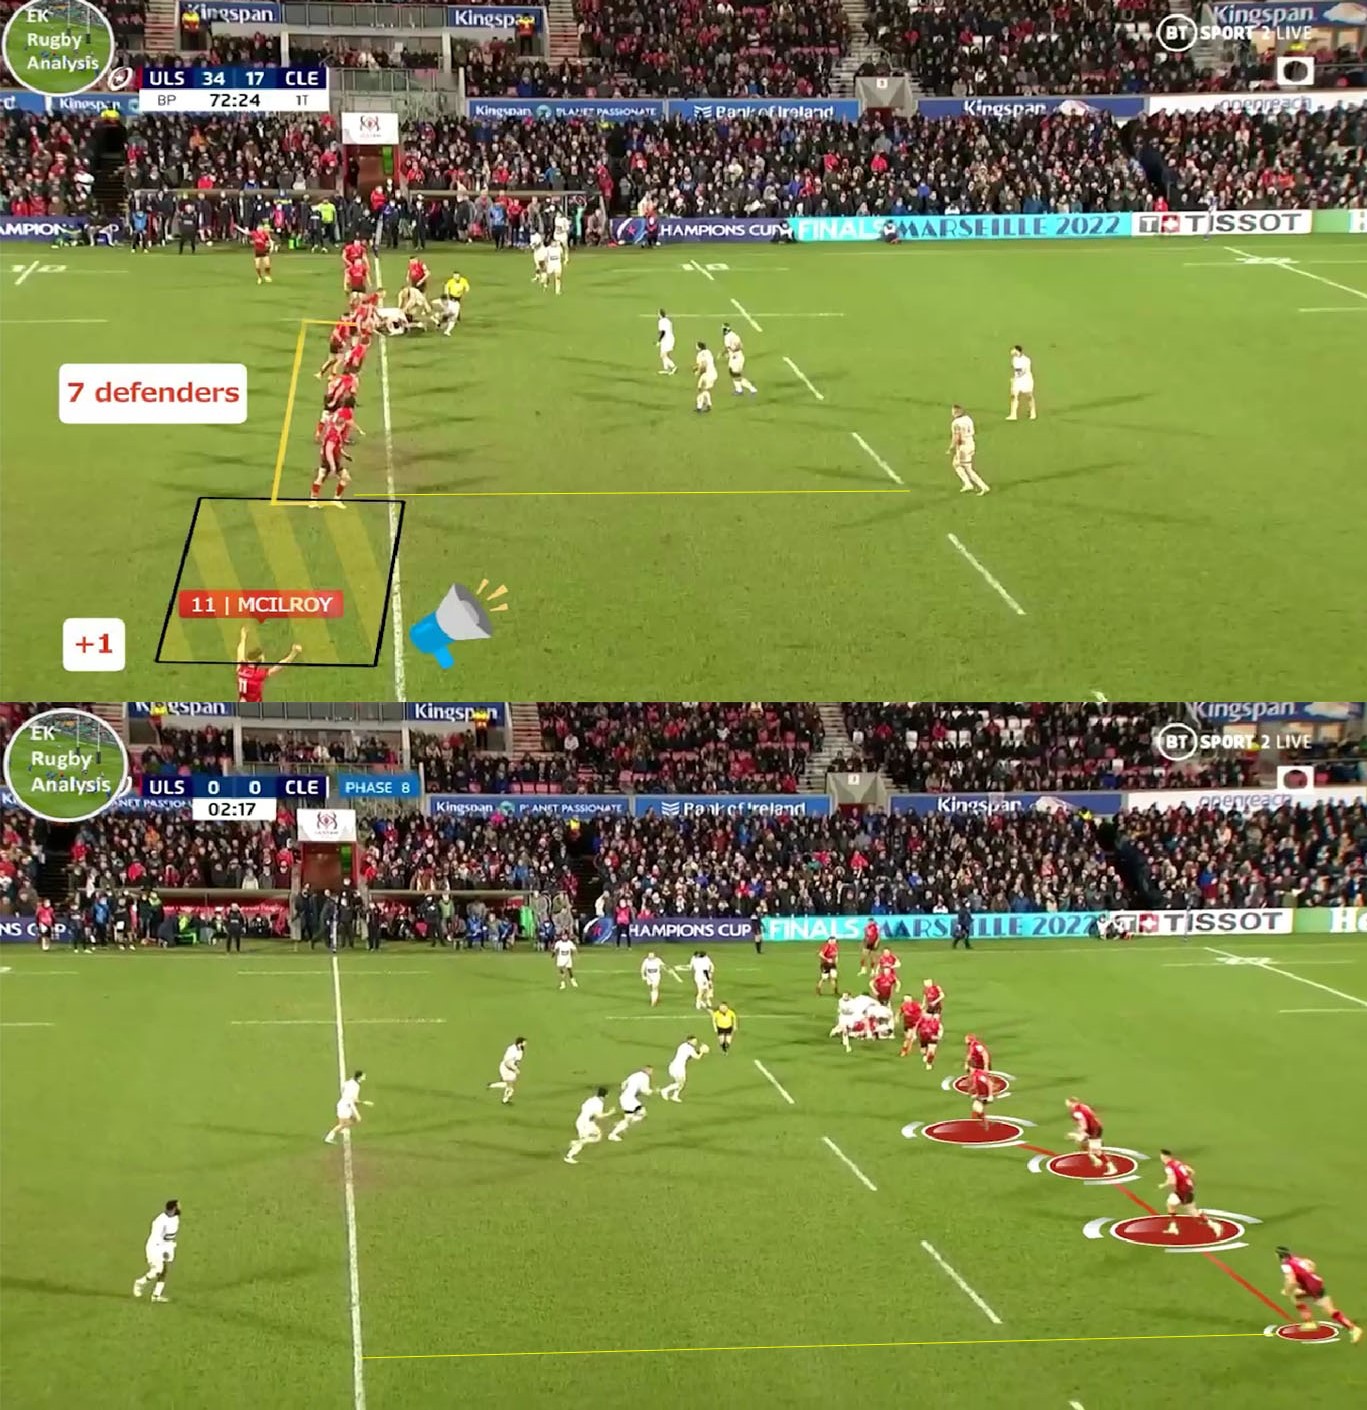 Ulster have the same amount of defenders on the openside in both instances here.